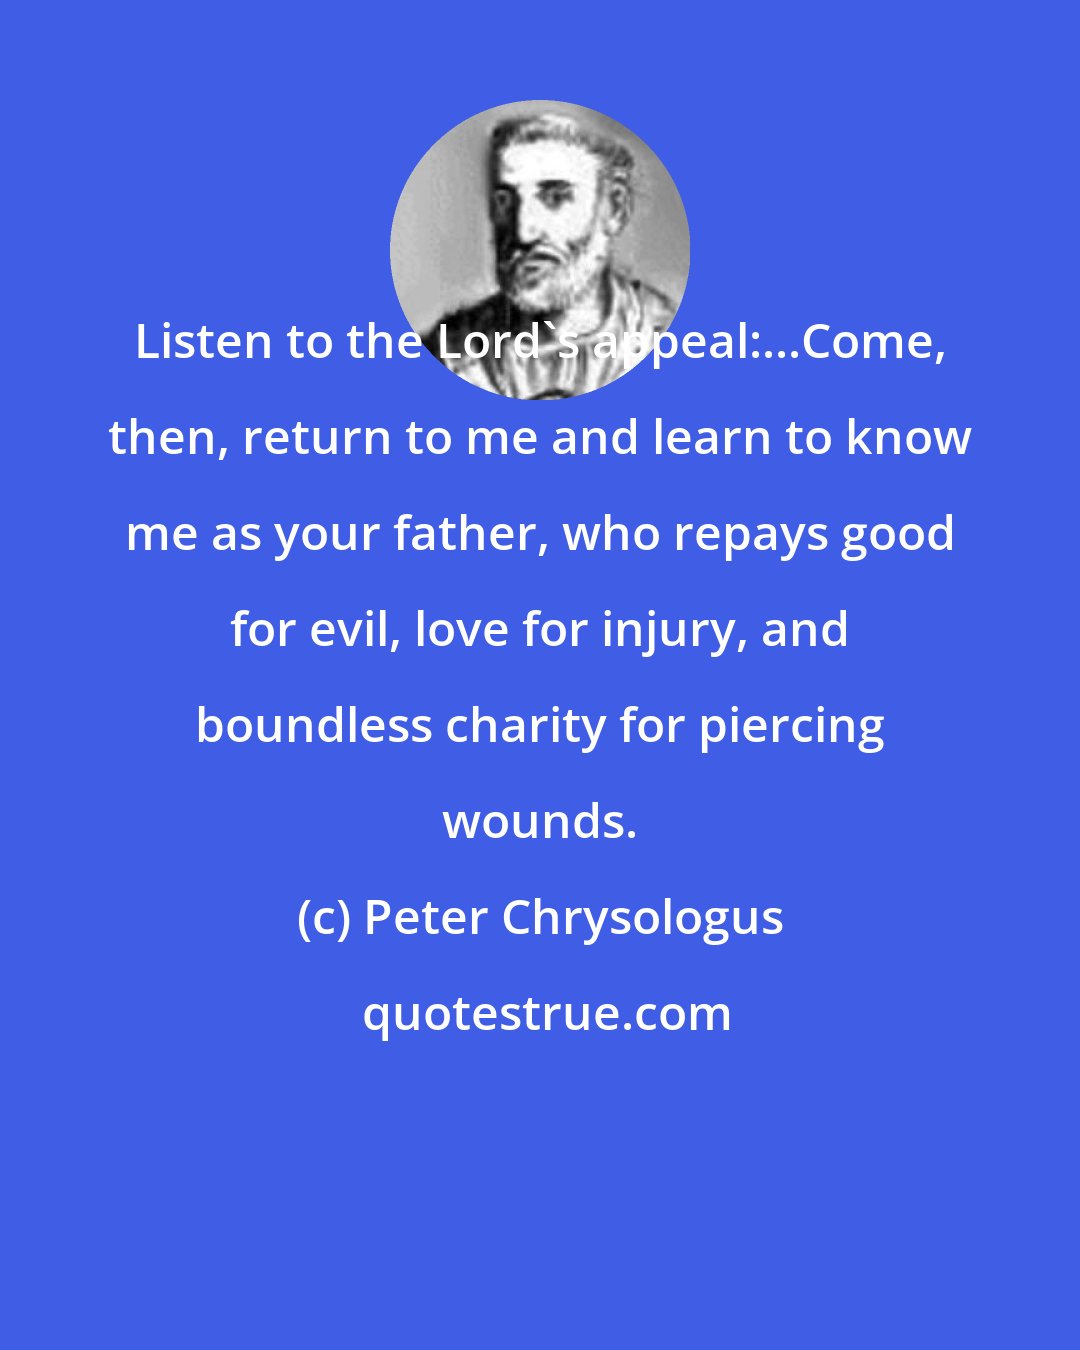 Peter Chrysologus: Listen to the Lord's appeal:...Come, then, return to me and learn to know me as your father, who repays good for evil, love for injury, and boundless charity for piercing wounds.